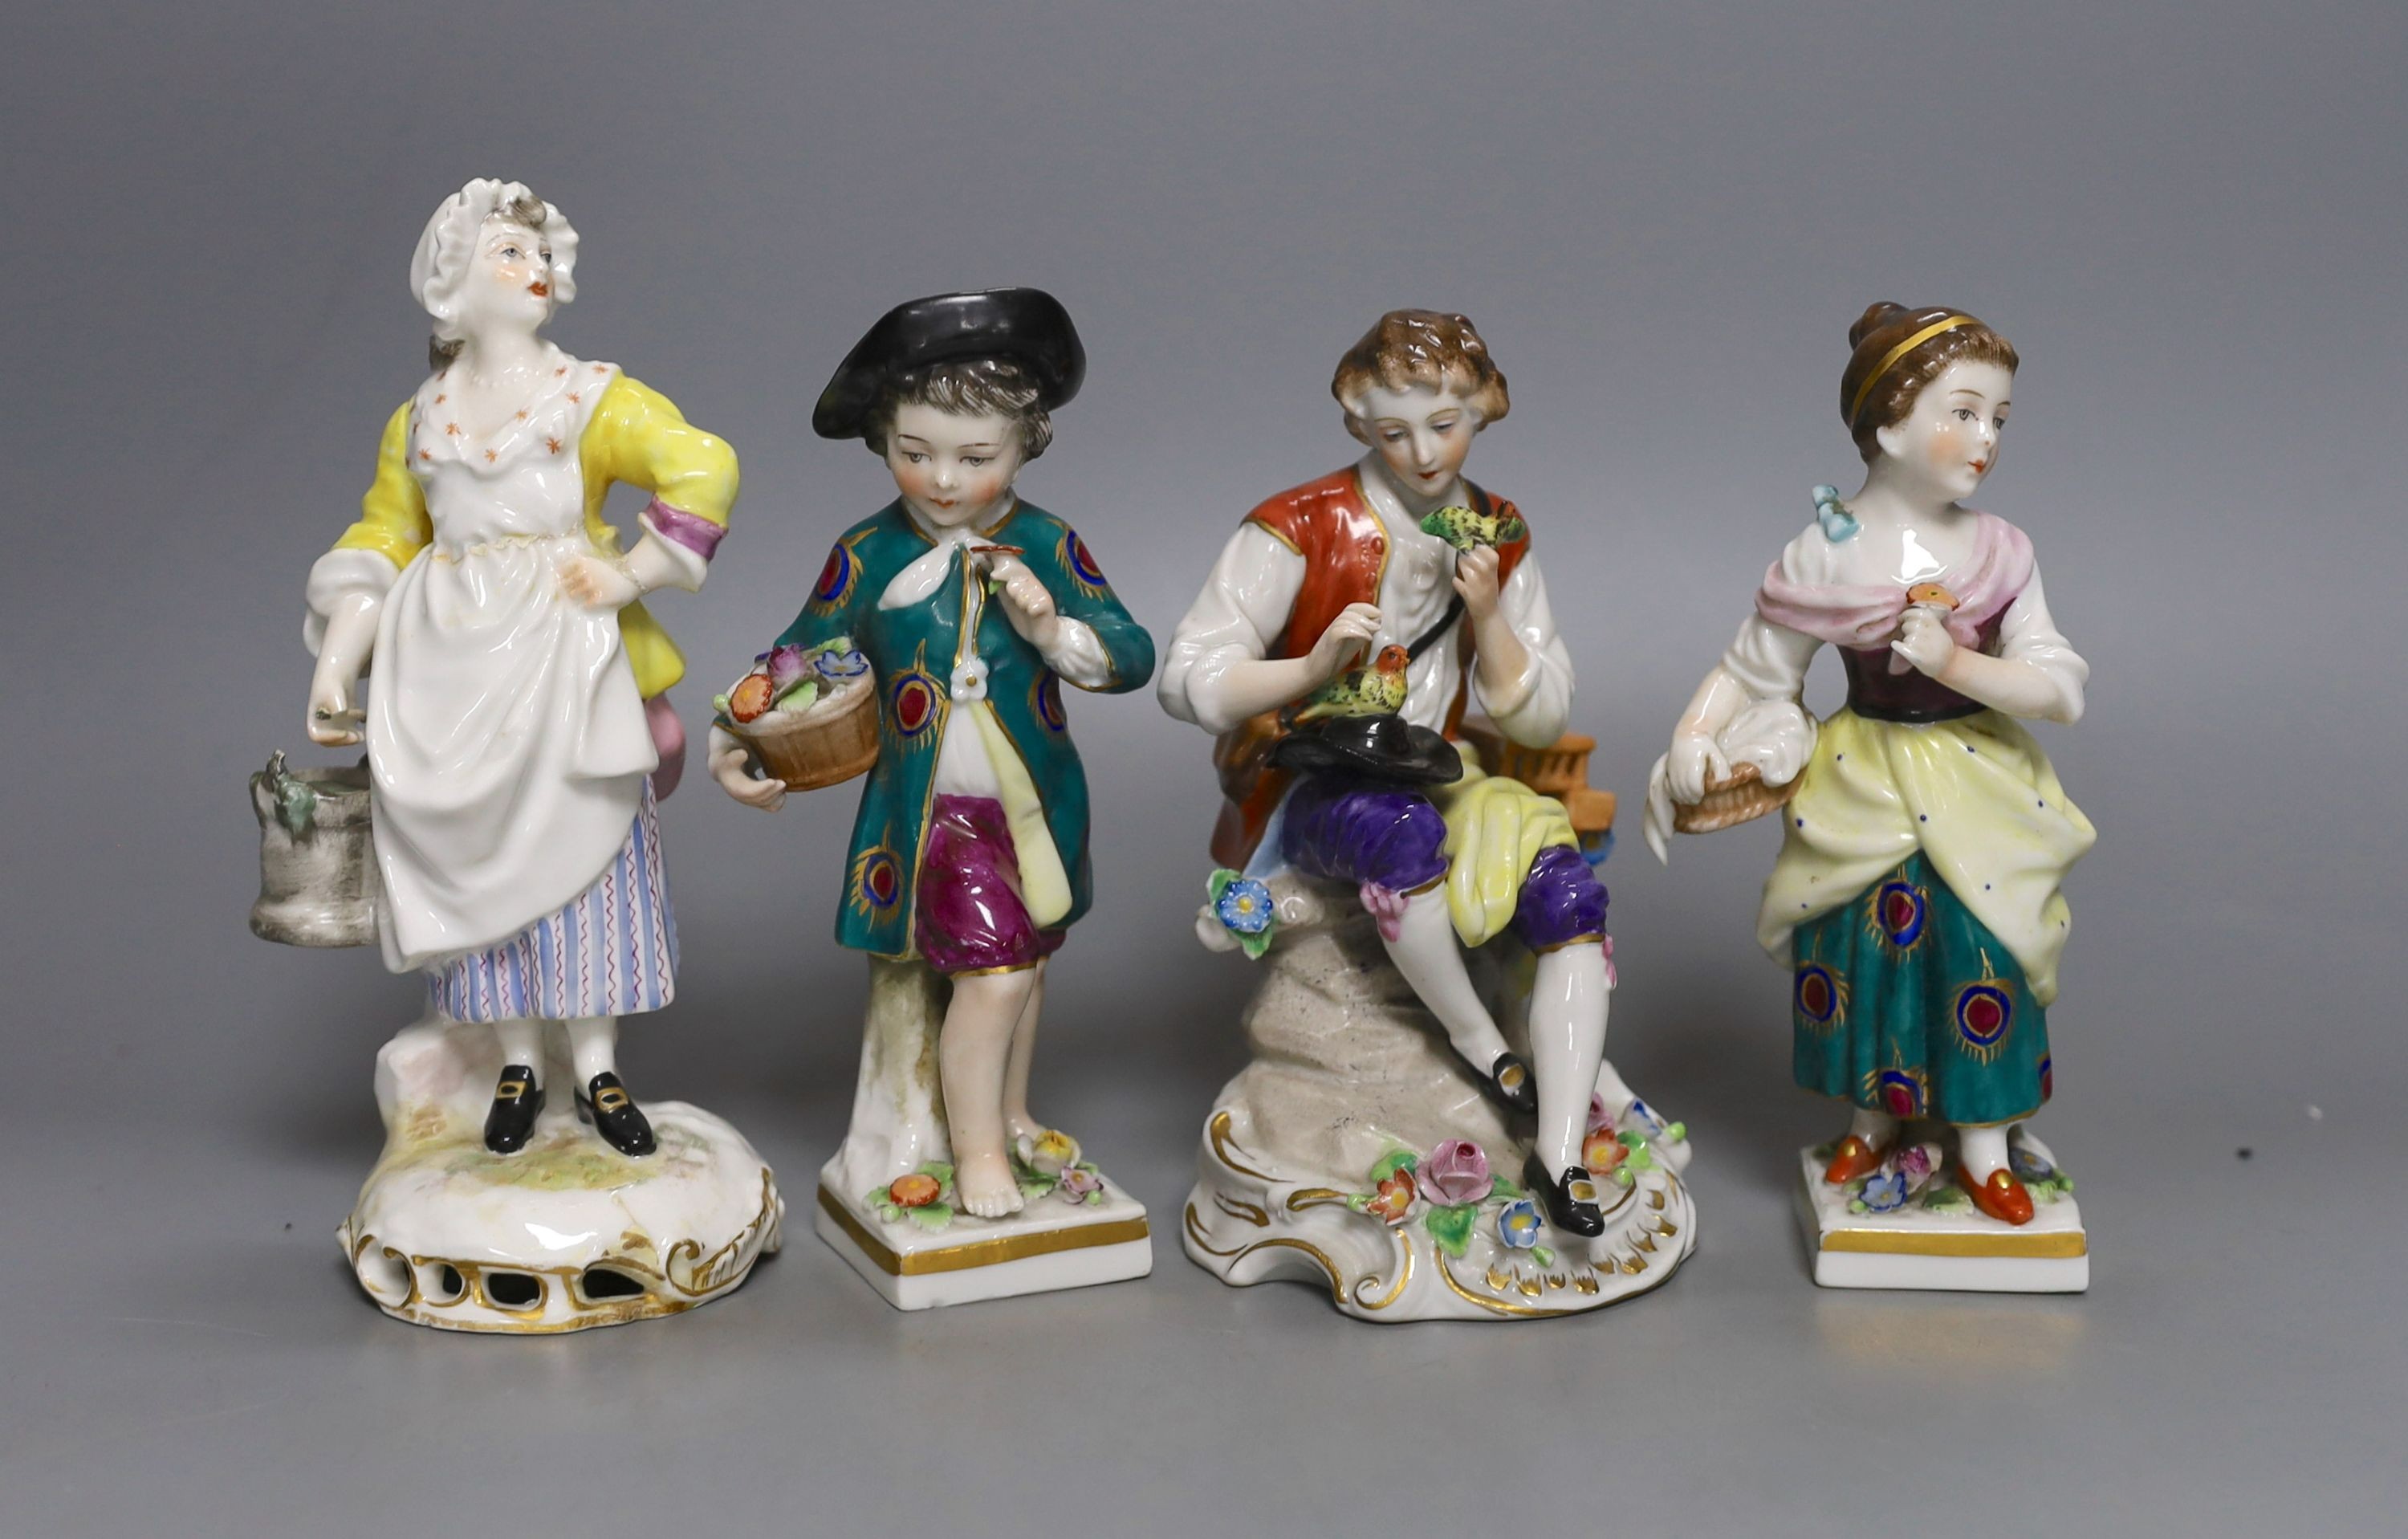 Two German porcelain figures and two French figures 15cm